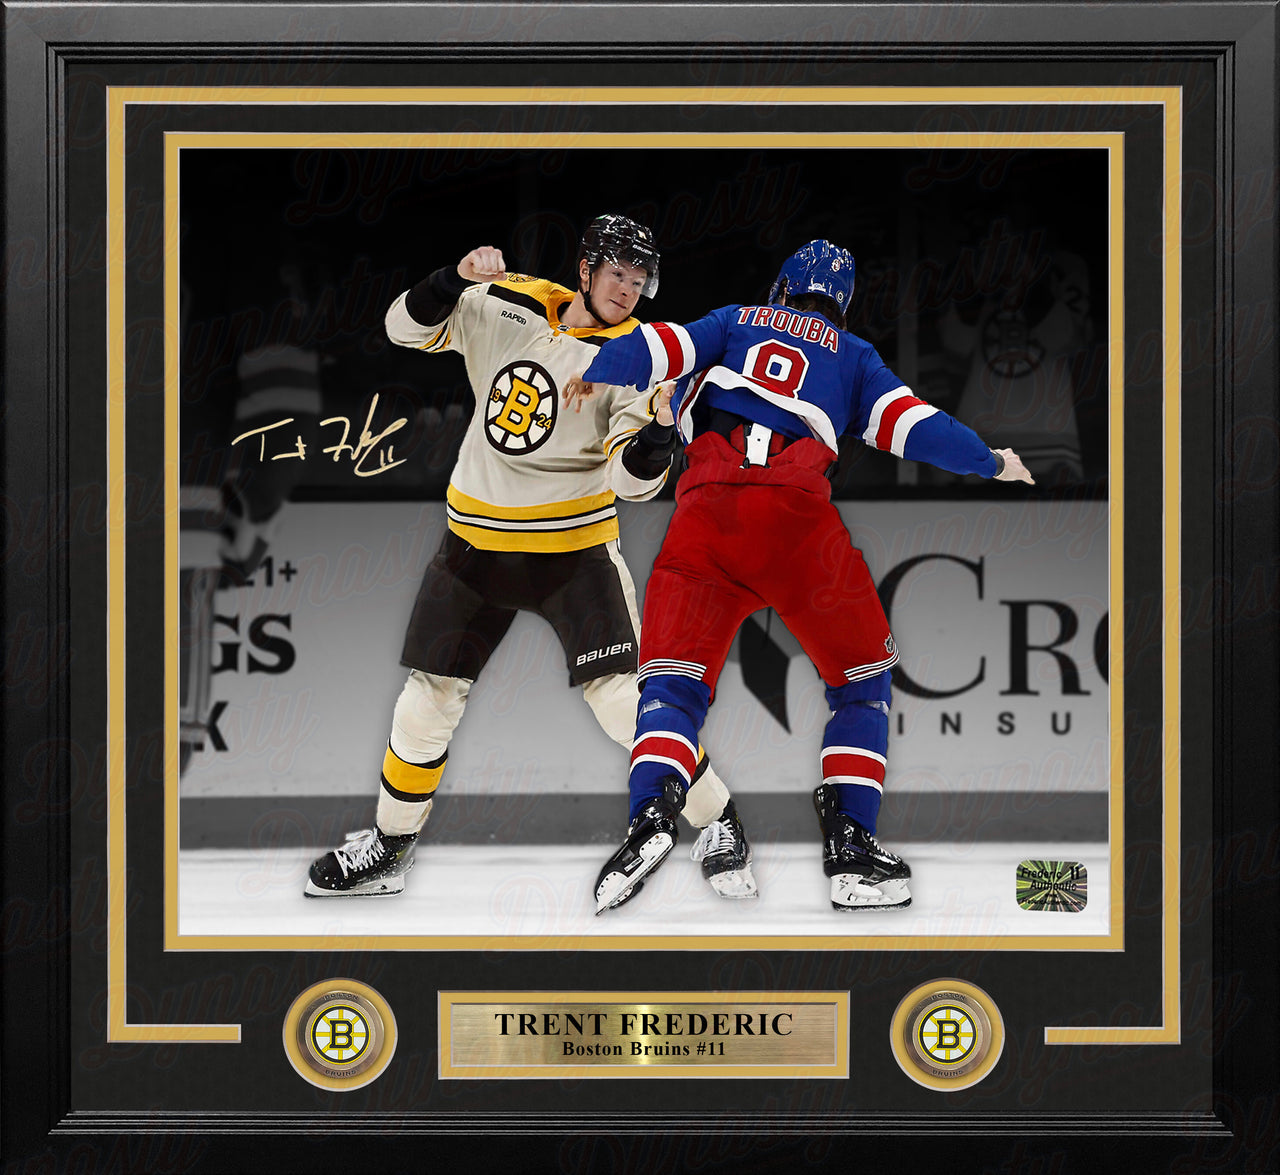 Trent Frederic Fighting Action Boston Bruins Autographed 16" x 20" Framed Hockey Photo